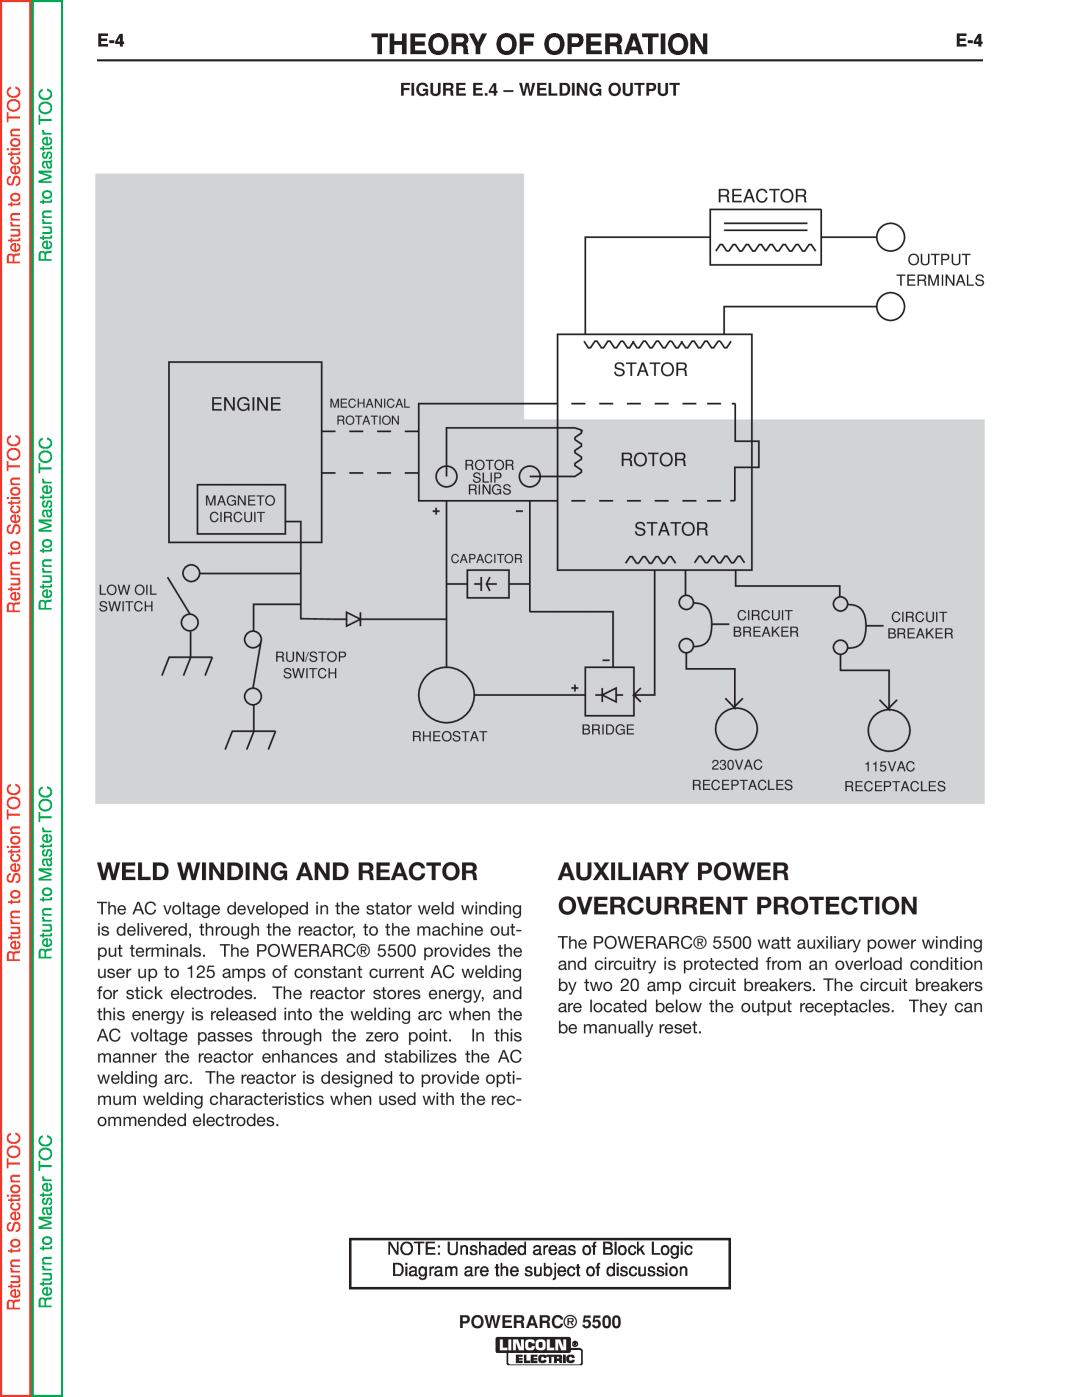 Lincoln Electric SVM197-A Weld Winding And Reactor, Auxiliary Power Overcurrent Protection, Theory Of Operation, Stator 